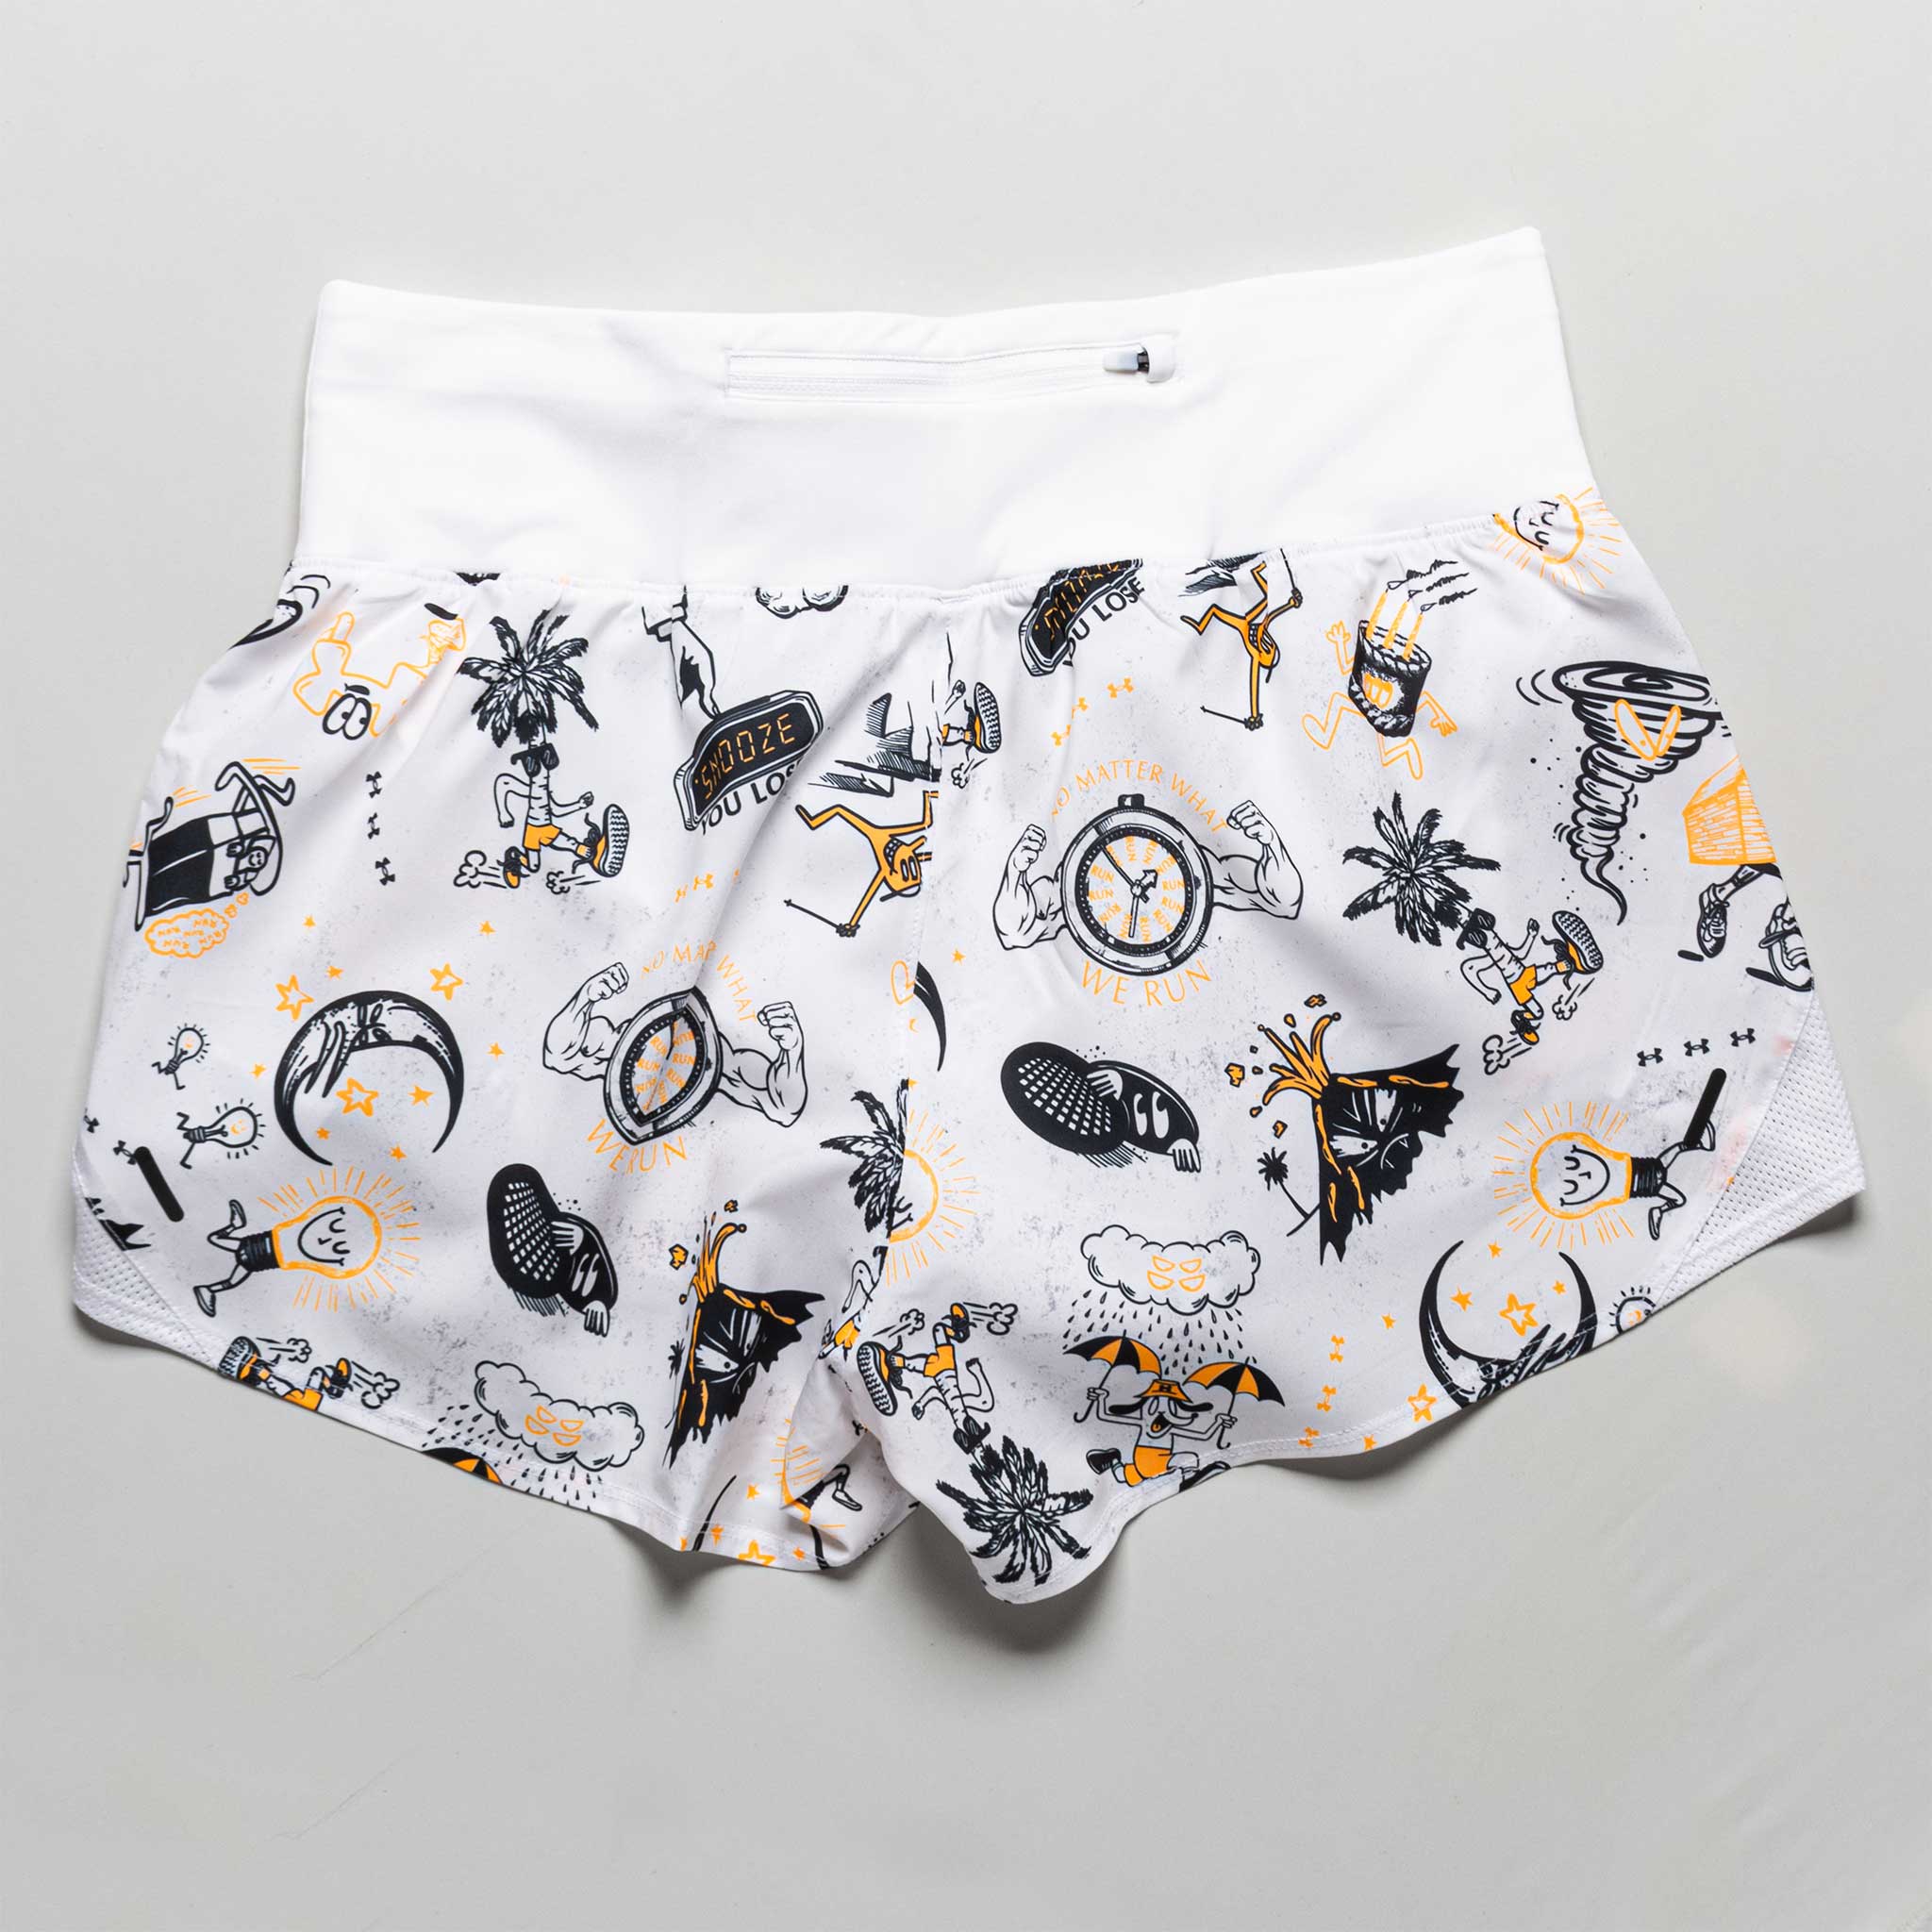 Under Armour Launch Shorts Women's We Run Edition